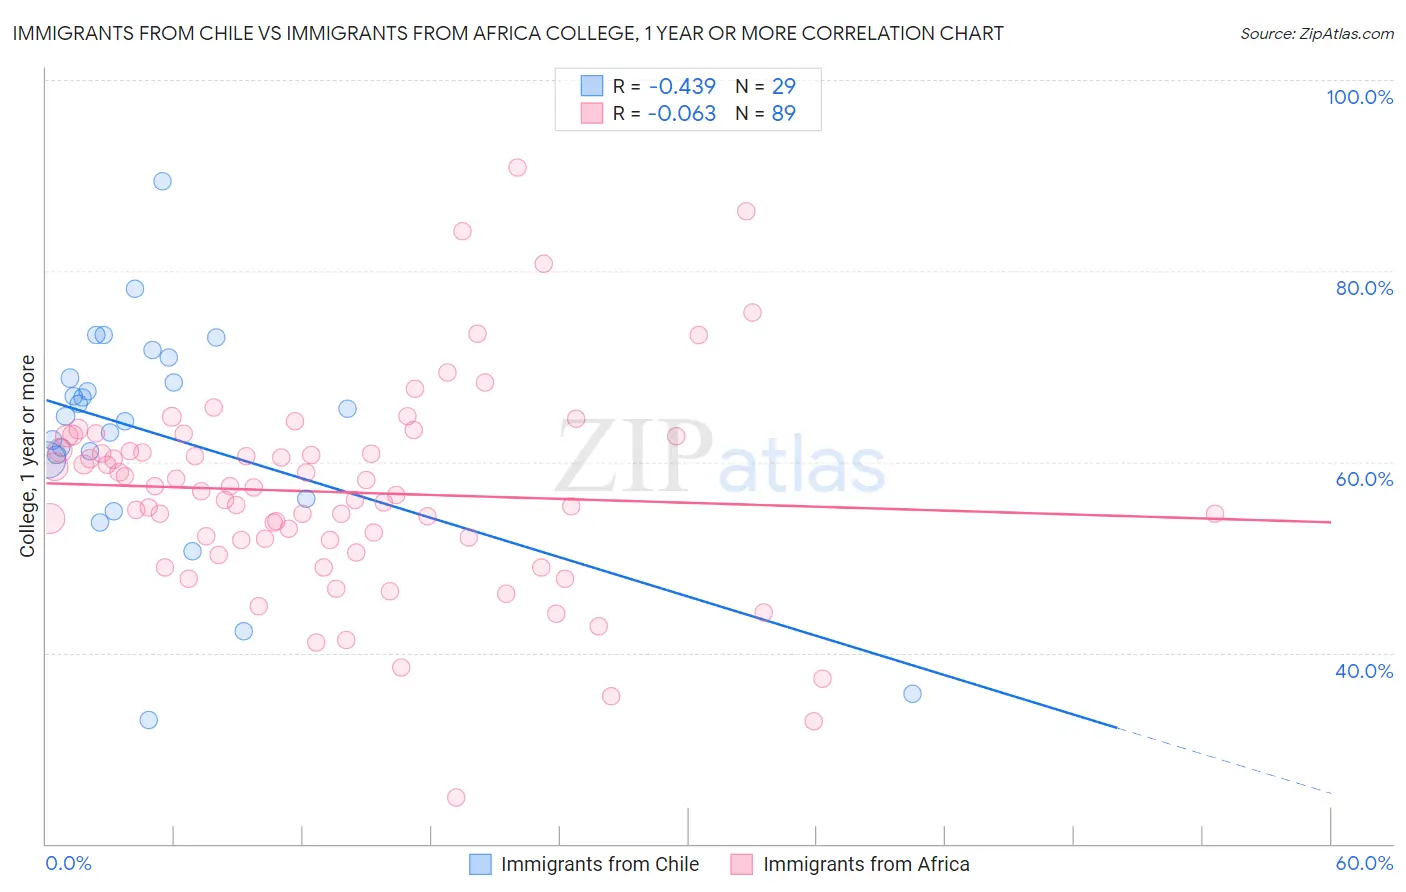 Immigrants from Chile vs Immigrants from Africa College, 1 year or more